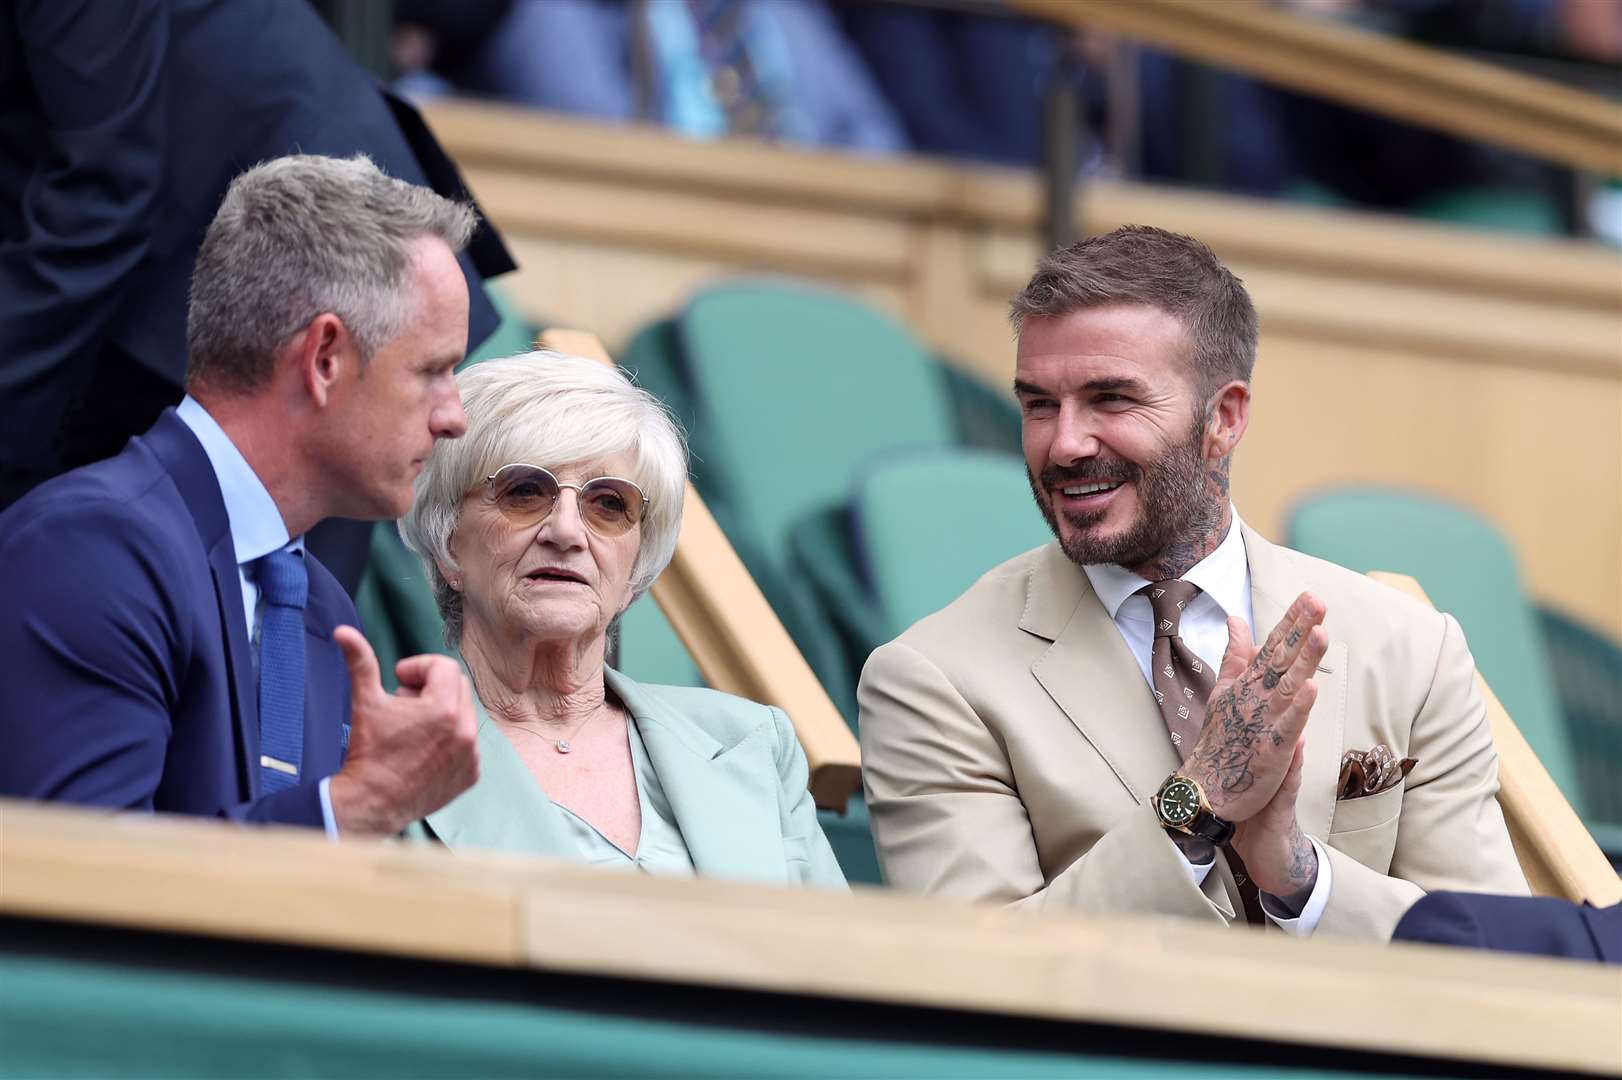 David Beckham greets Luke Donald as he takes his seat alongside his mother Sandra Beckham in the Royal Box of Centre Court (Steven Paston/PA)